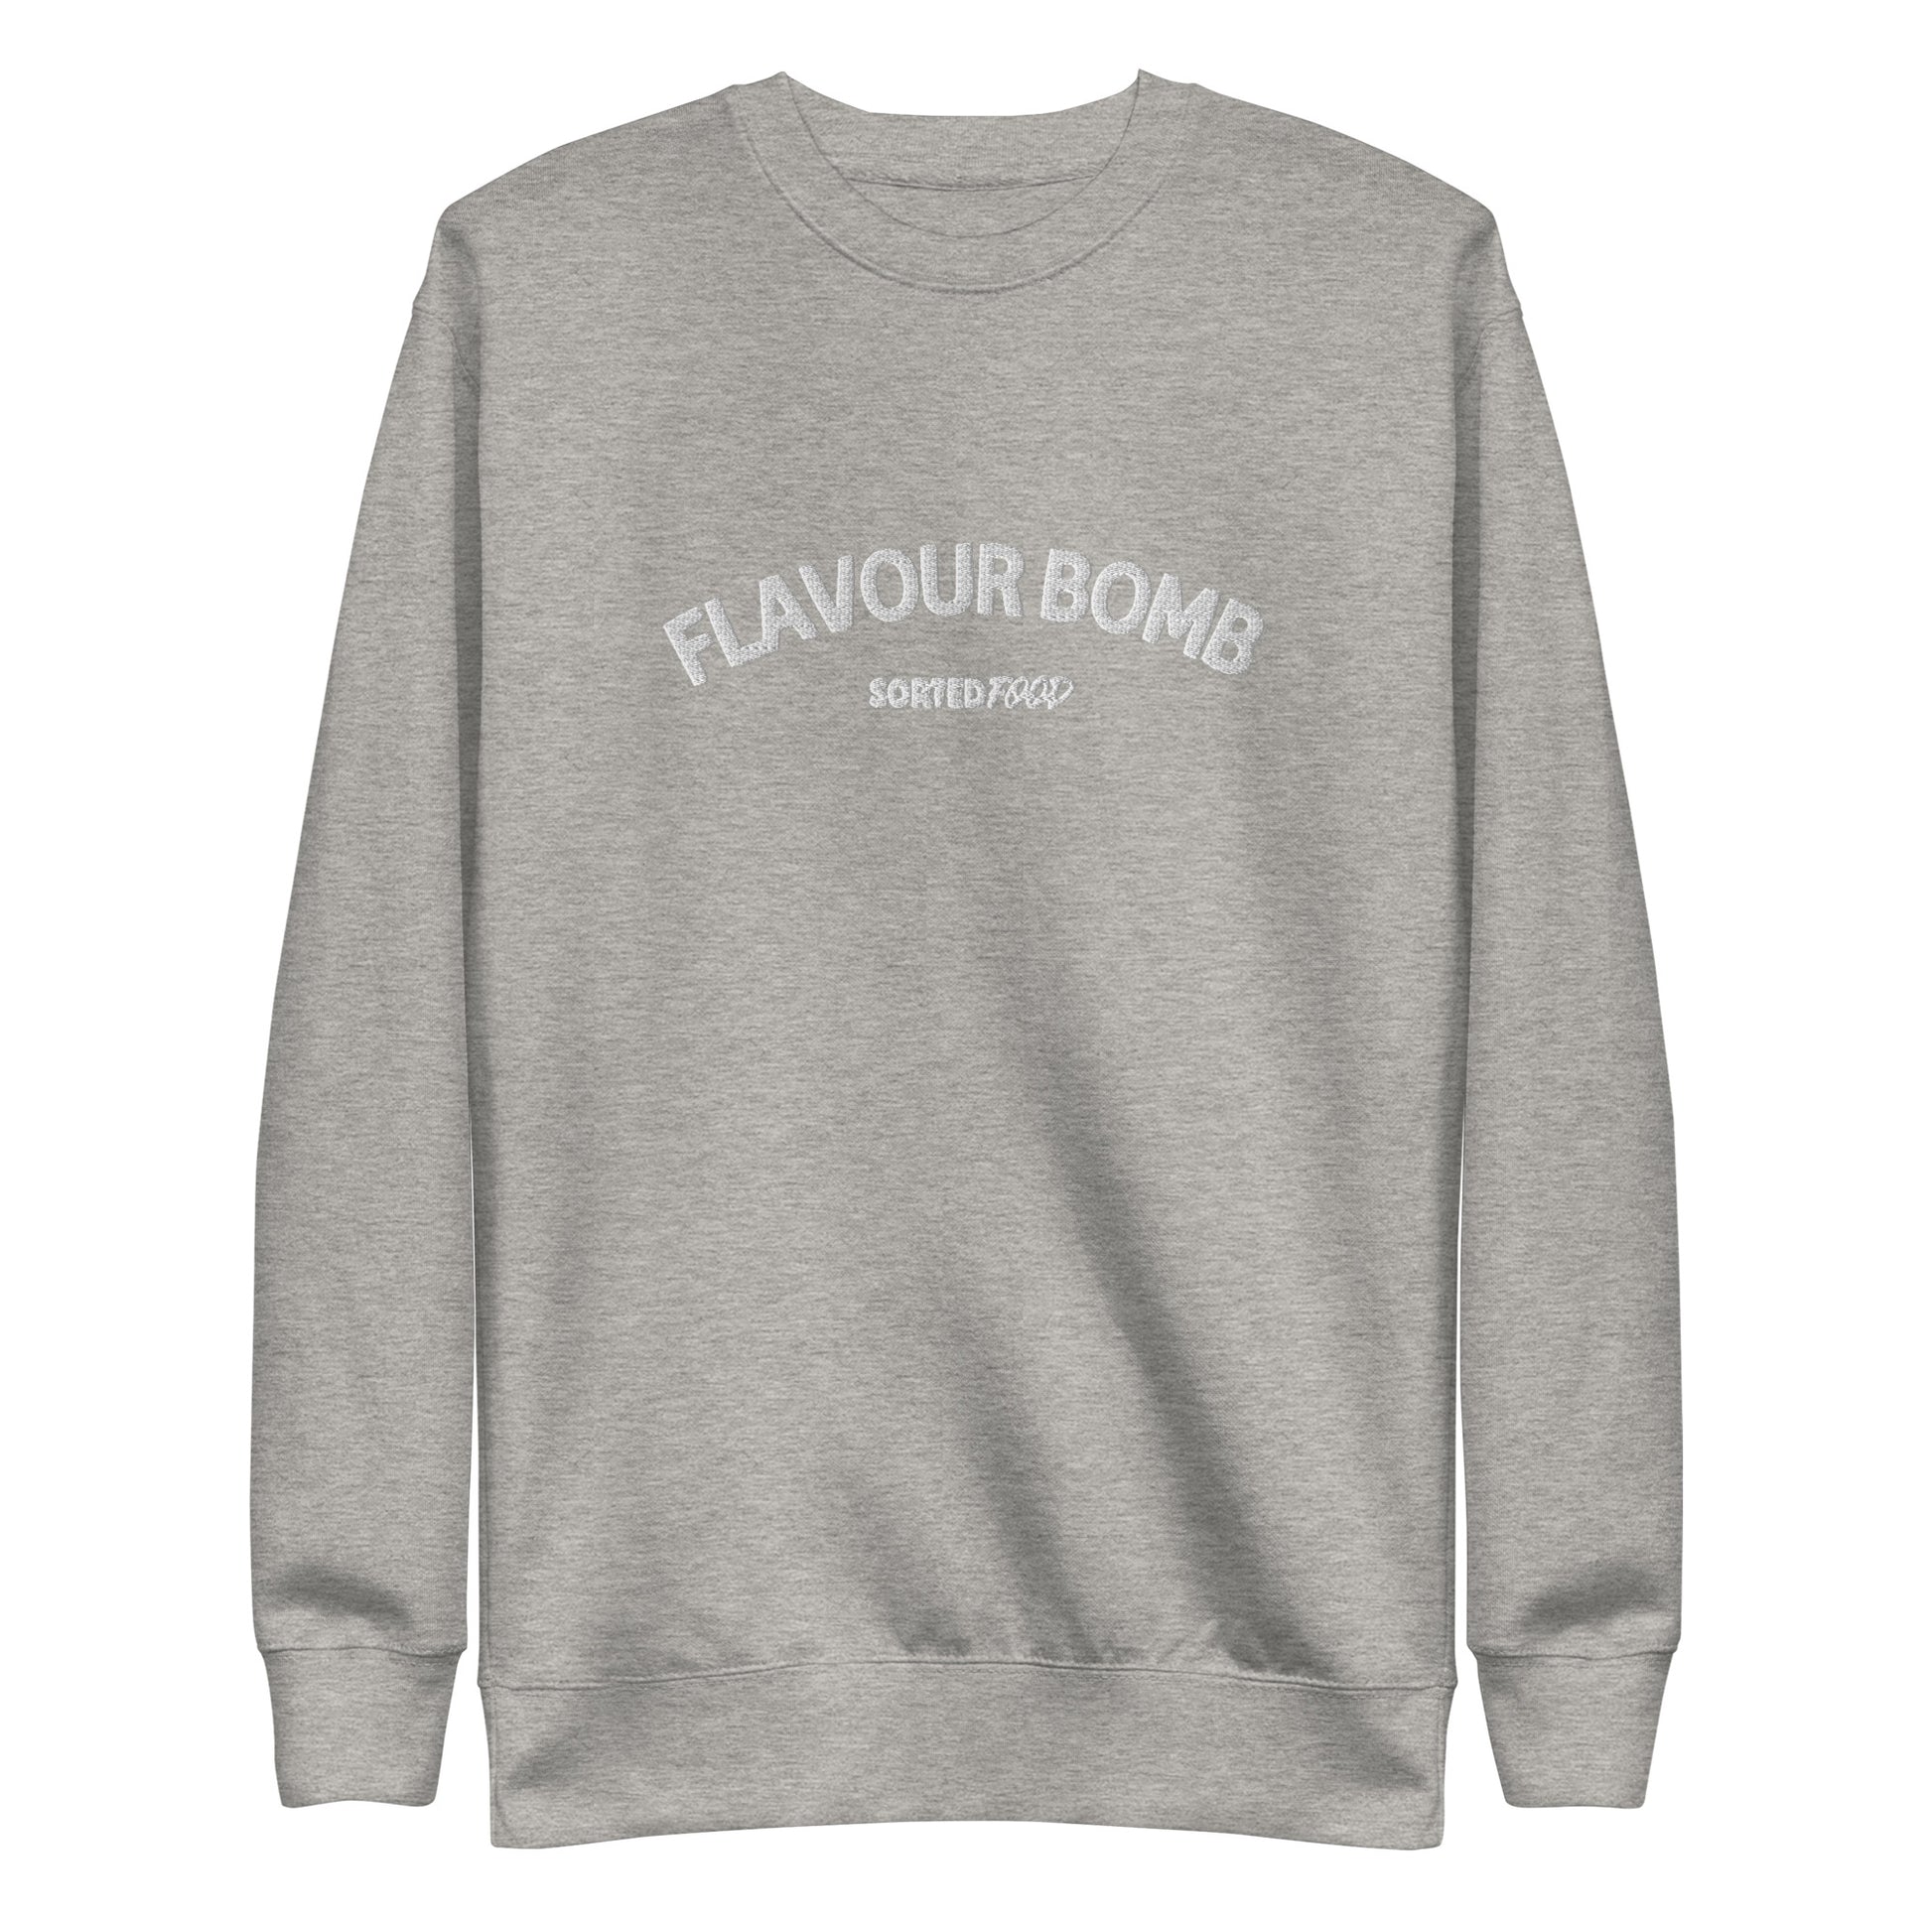 Flavour Bomb Sweat – Sorted Food